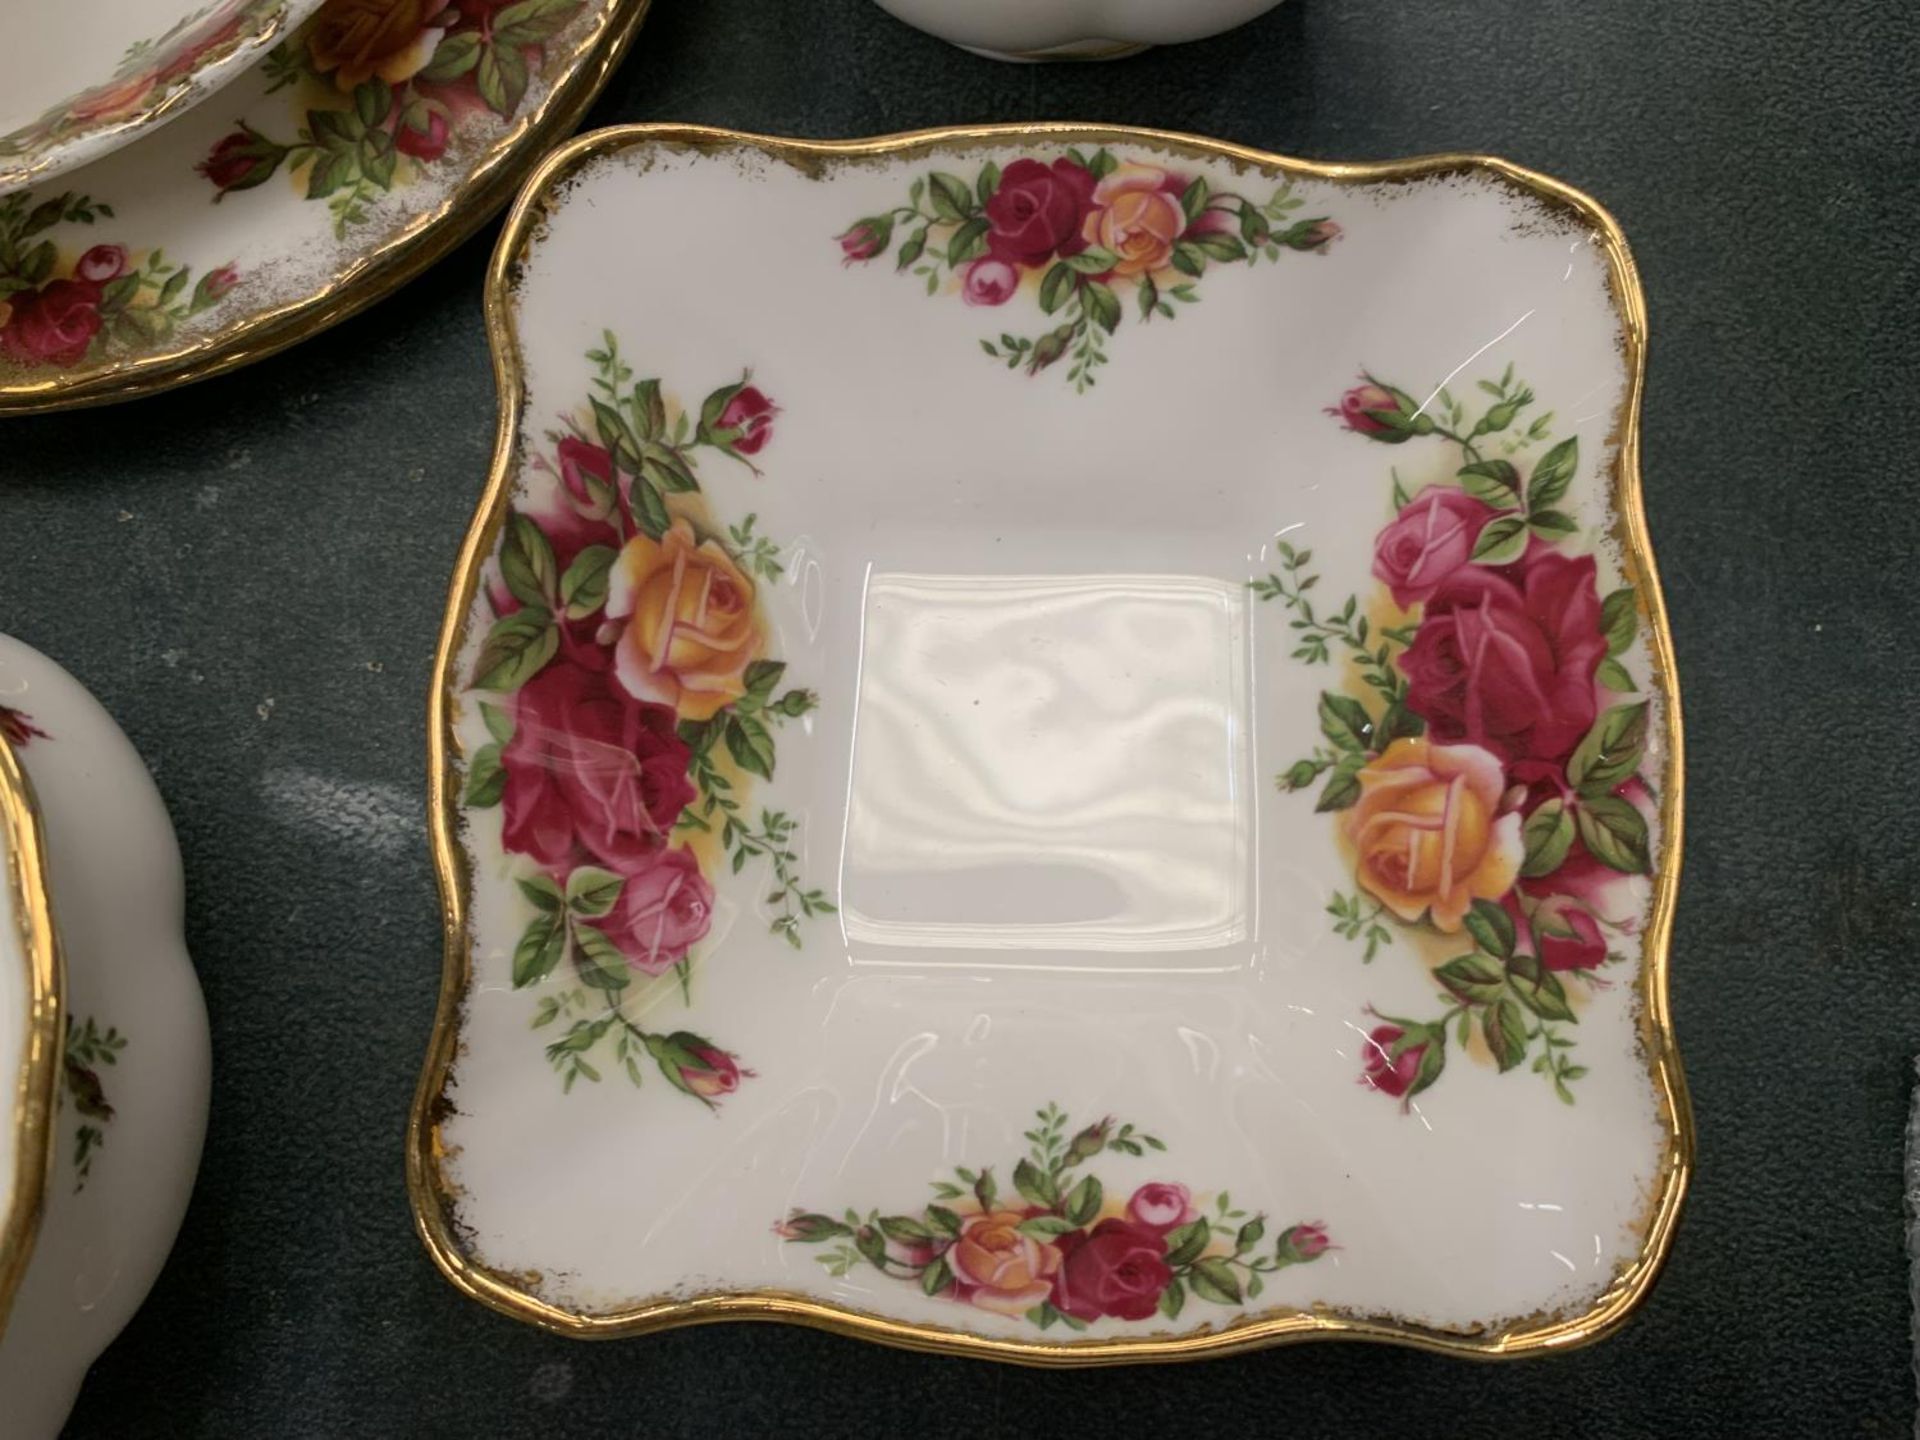 A ROYAL ALBERT 'OLD COUNTRY ROSES' PART TEA SET TO INCLUDE CUPS, SAUCERS, PLATES, A CREAM JUG, SUGAR - Image 3 of 5